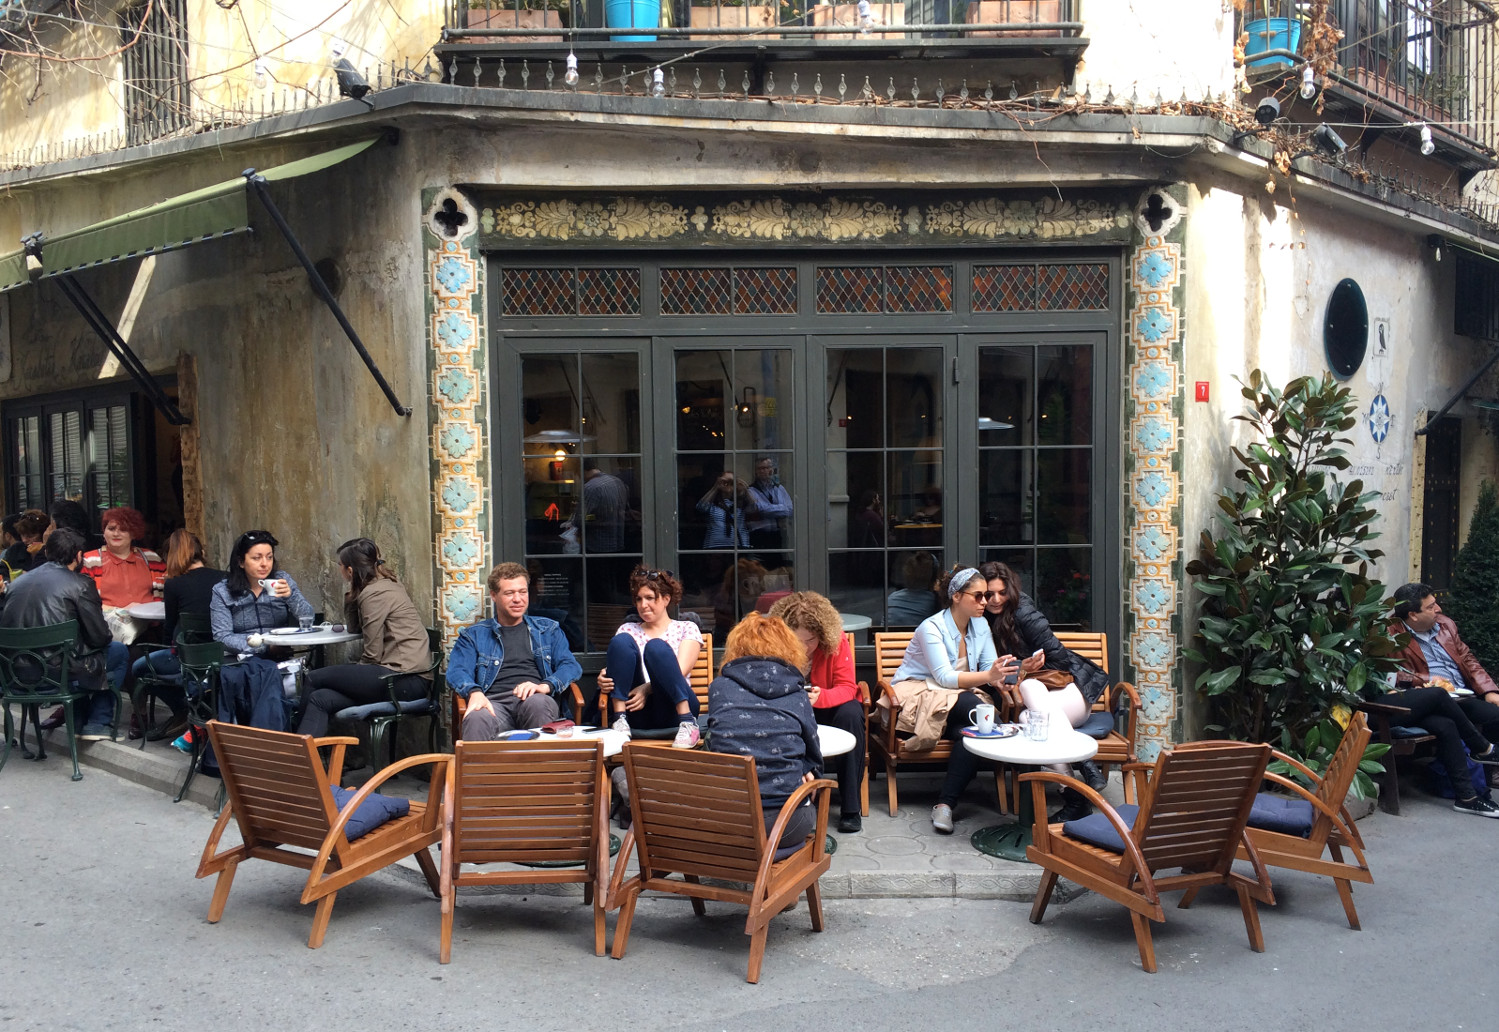 Chic cafes and galleries crowd the cobbled streets of Karaköy. Image by Virginia Maxwell / Lonely Planet